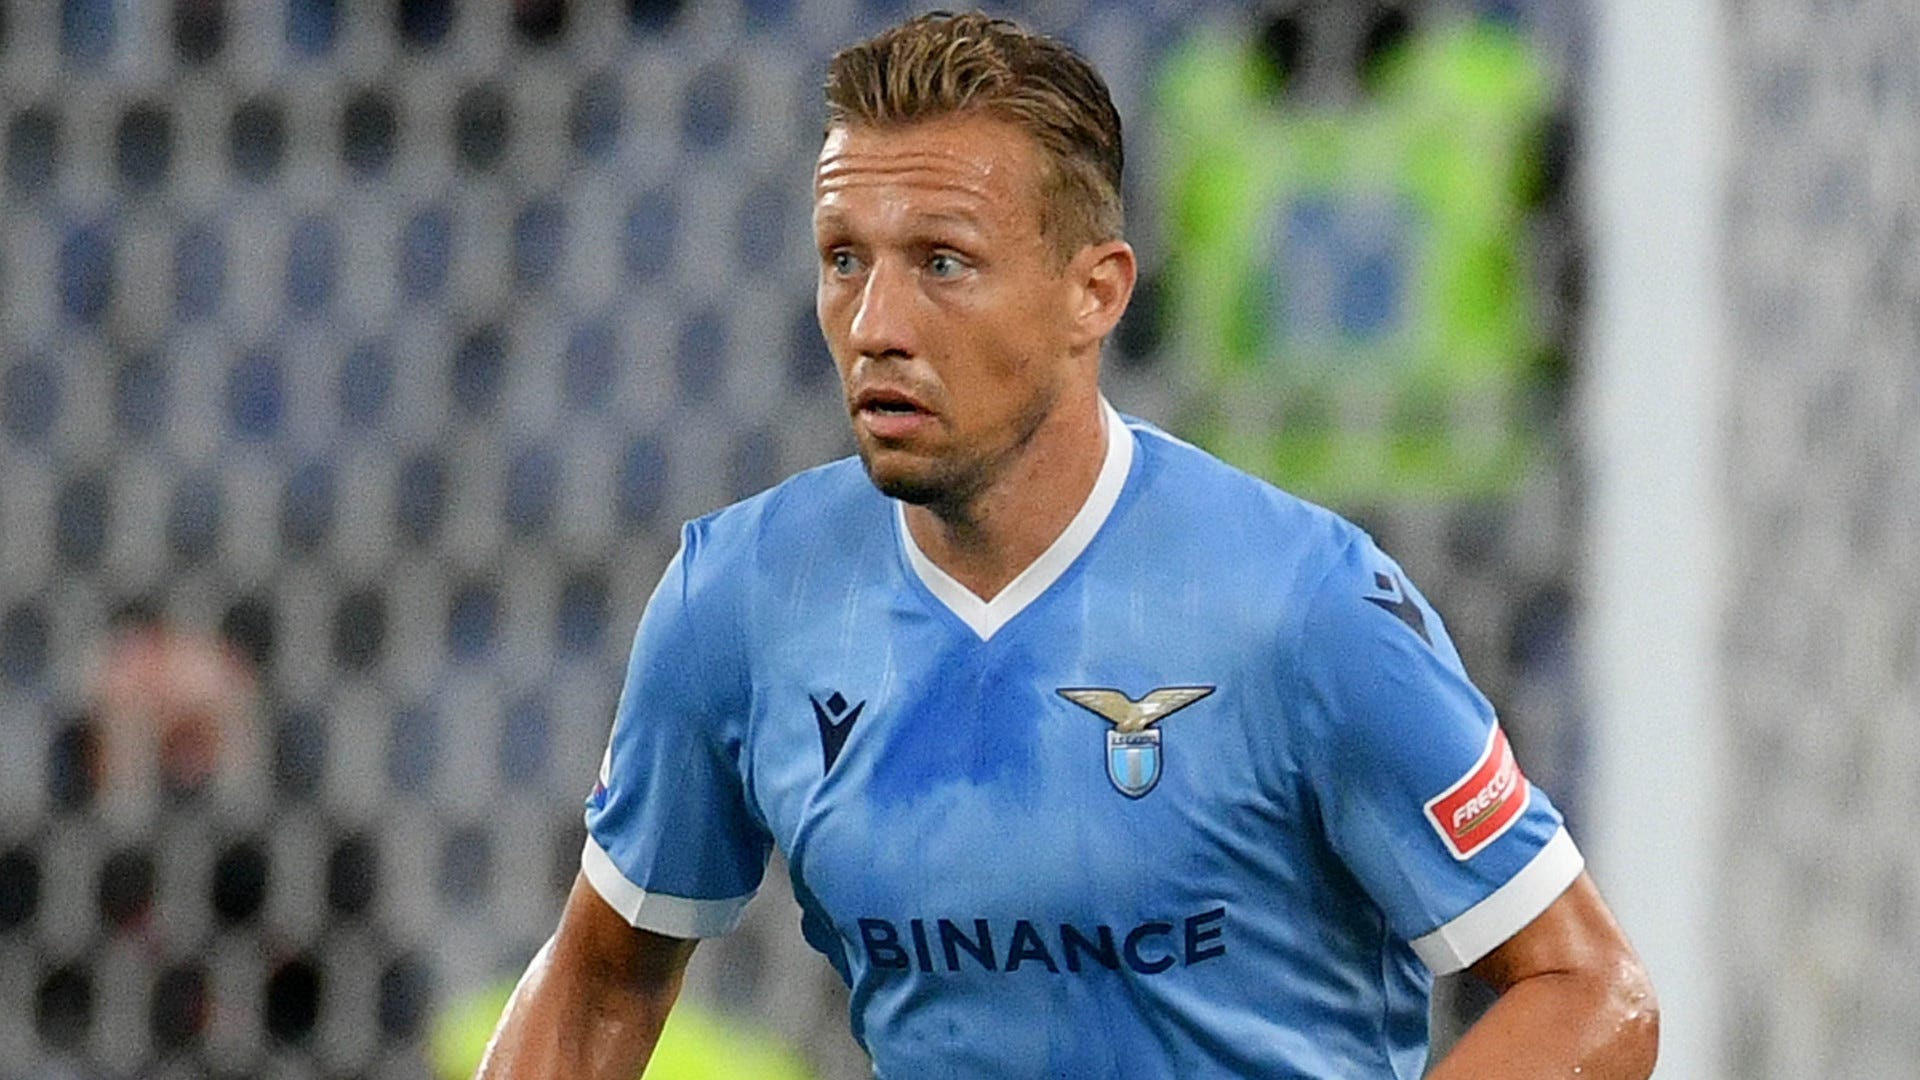 Former Liverpool star Lucas Leiva withdrawn from Gremio training after  pre-season scan reveals possible heart issue 